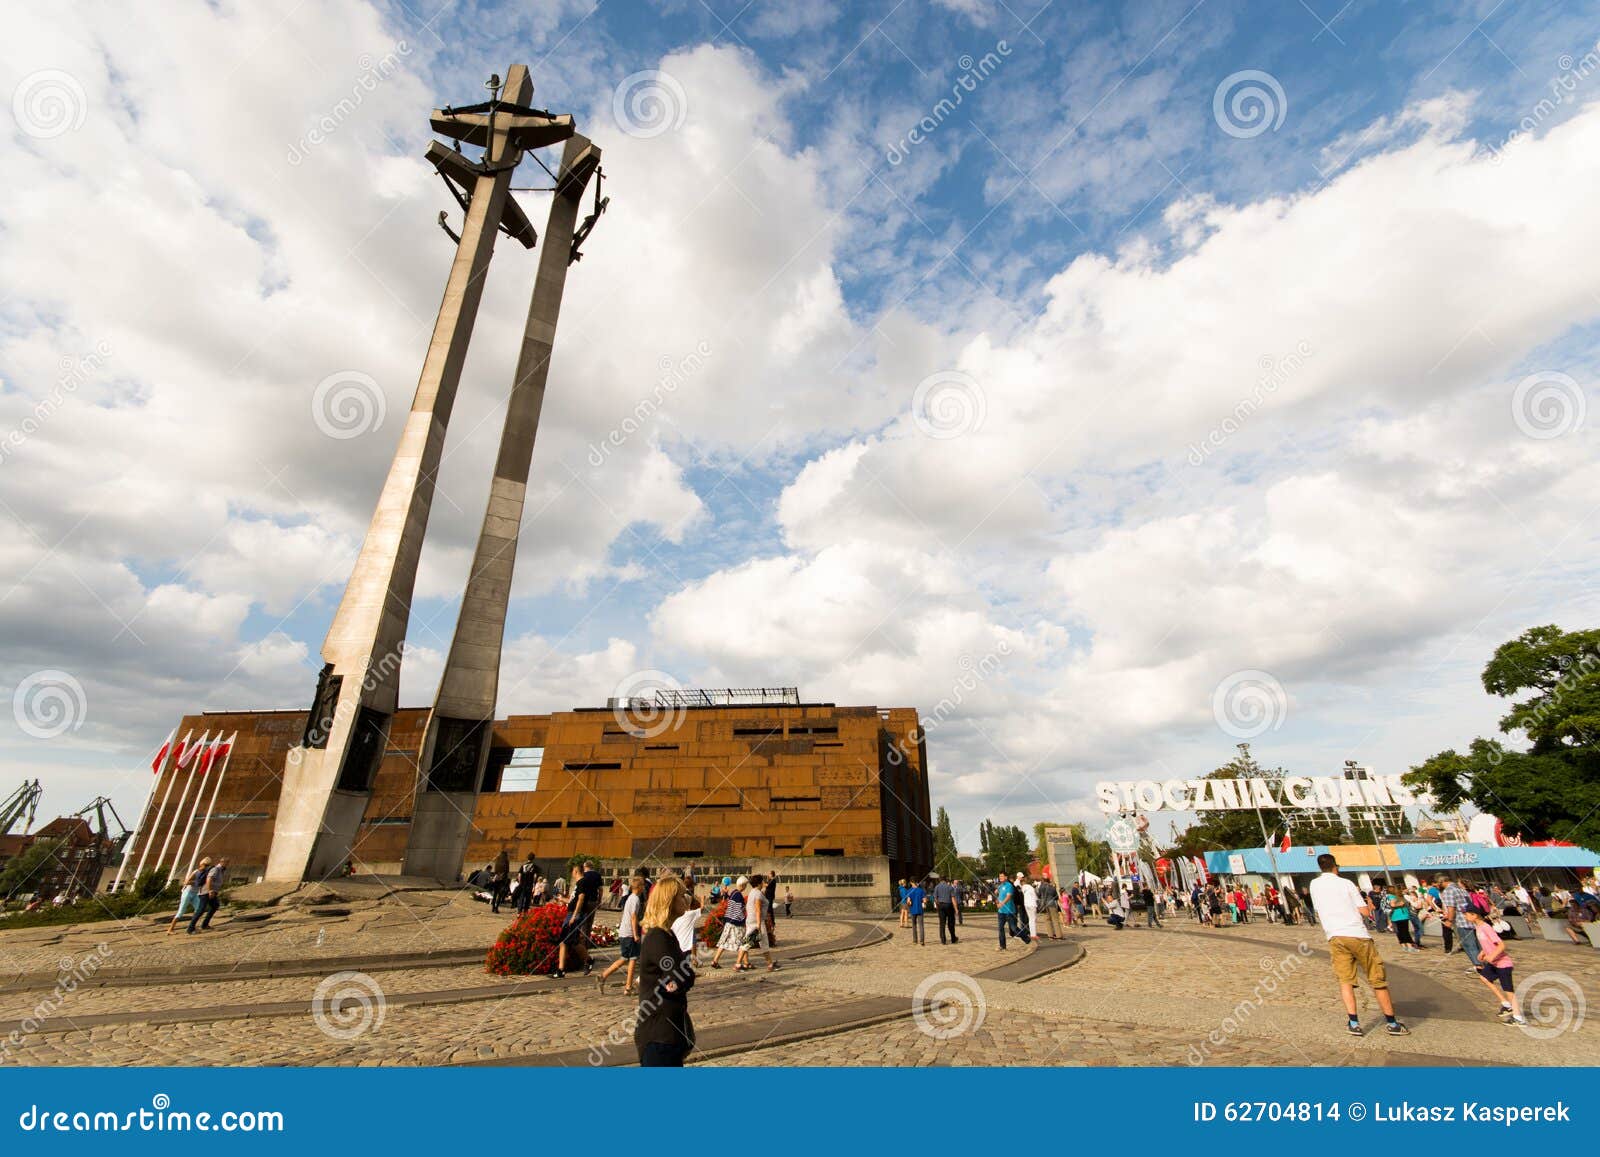 Gdansk, Solidarity square editorial stock image. Image of eastern